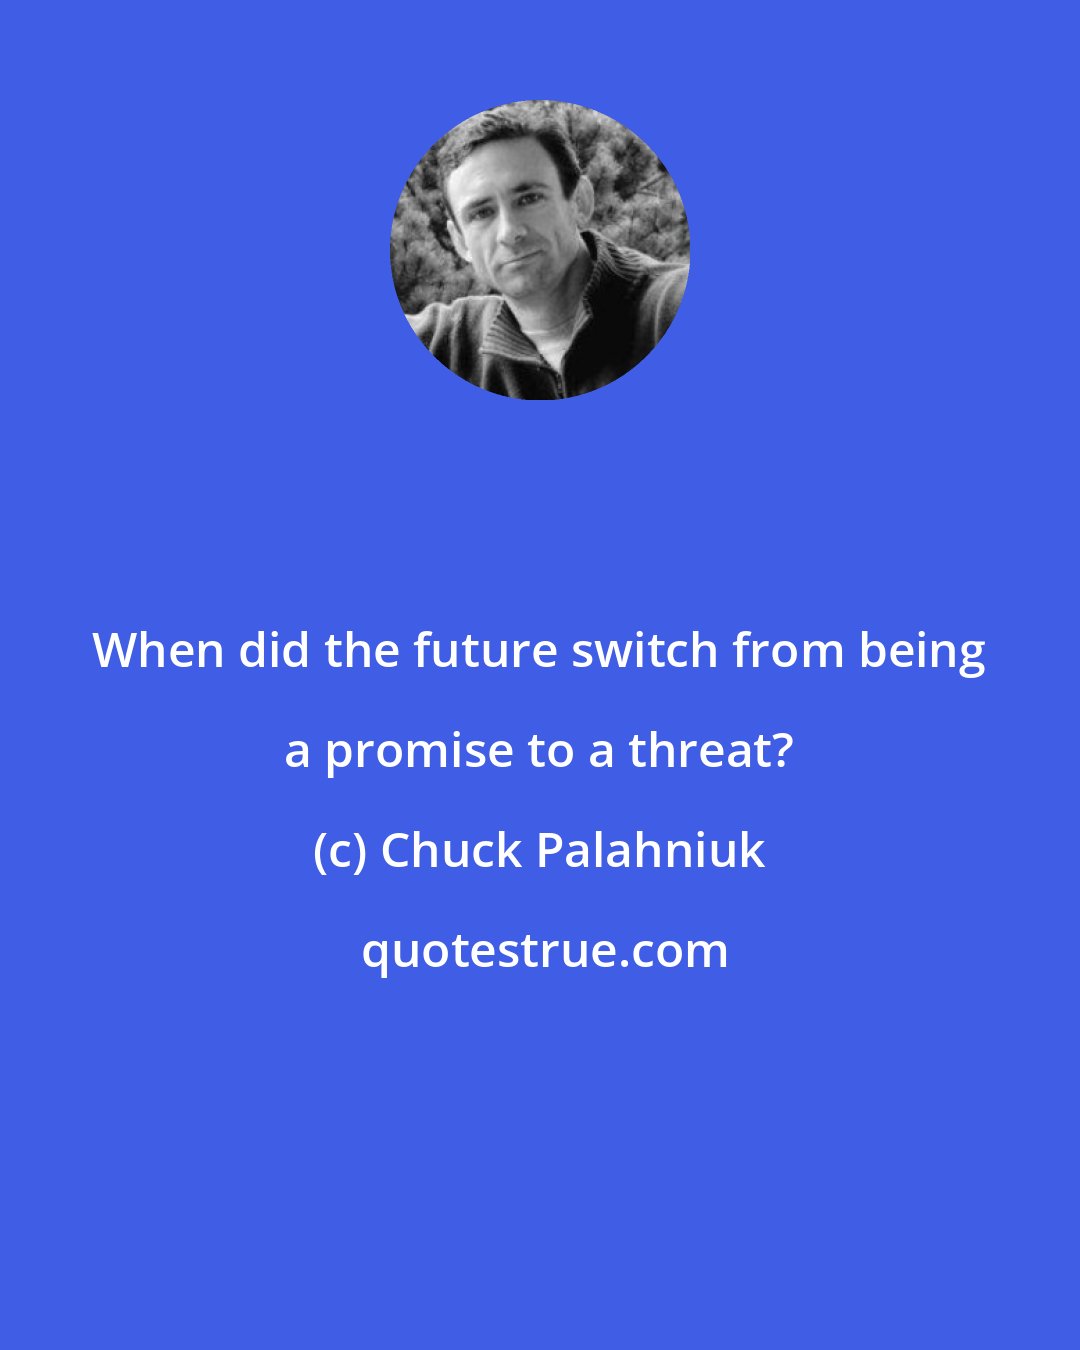 Chuck Palahniuk: When did the future switch from being a promise to a threat?